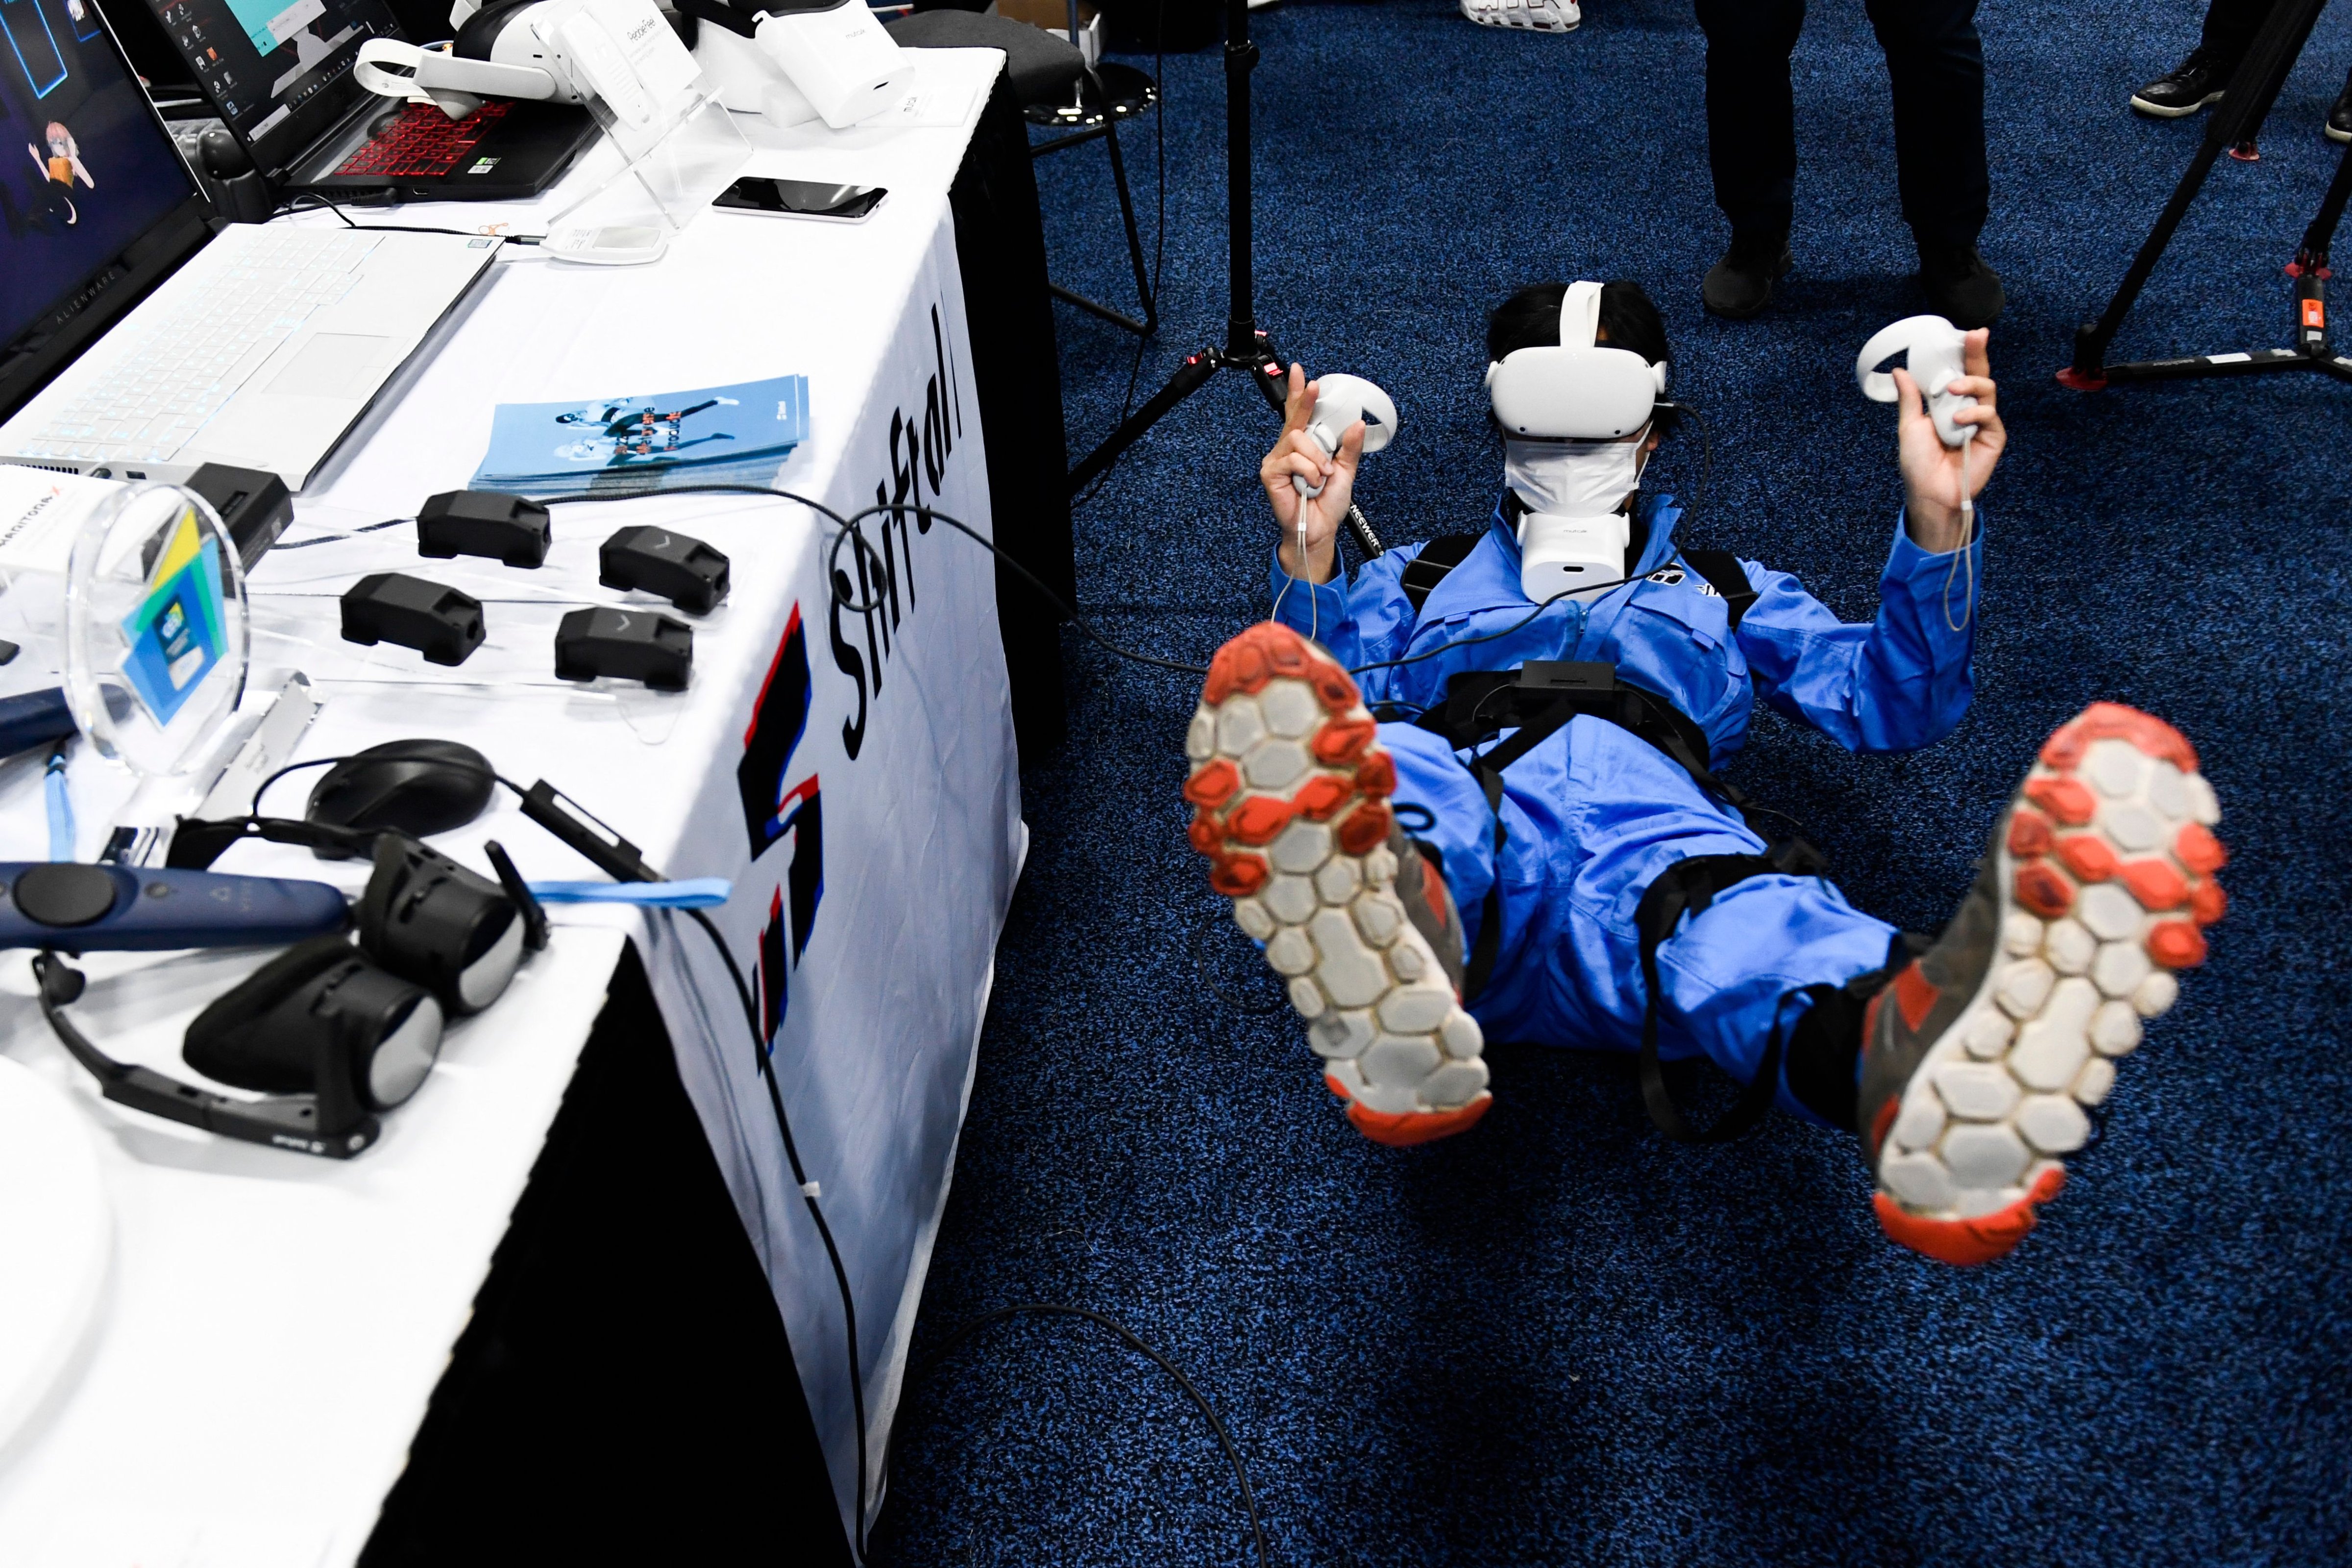 An attendee tries out the Shiftall Haritora X full-body tracking system and Oculus headset at CES 2022. (Patrick T. Fallon–AFP/Getty Images)